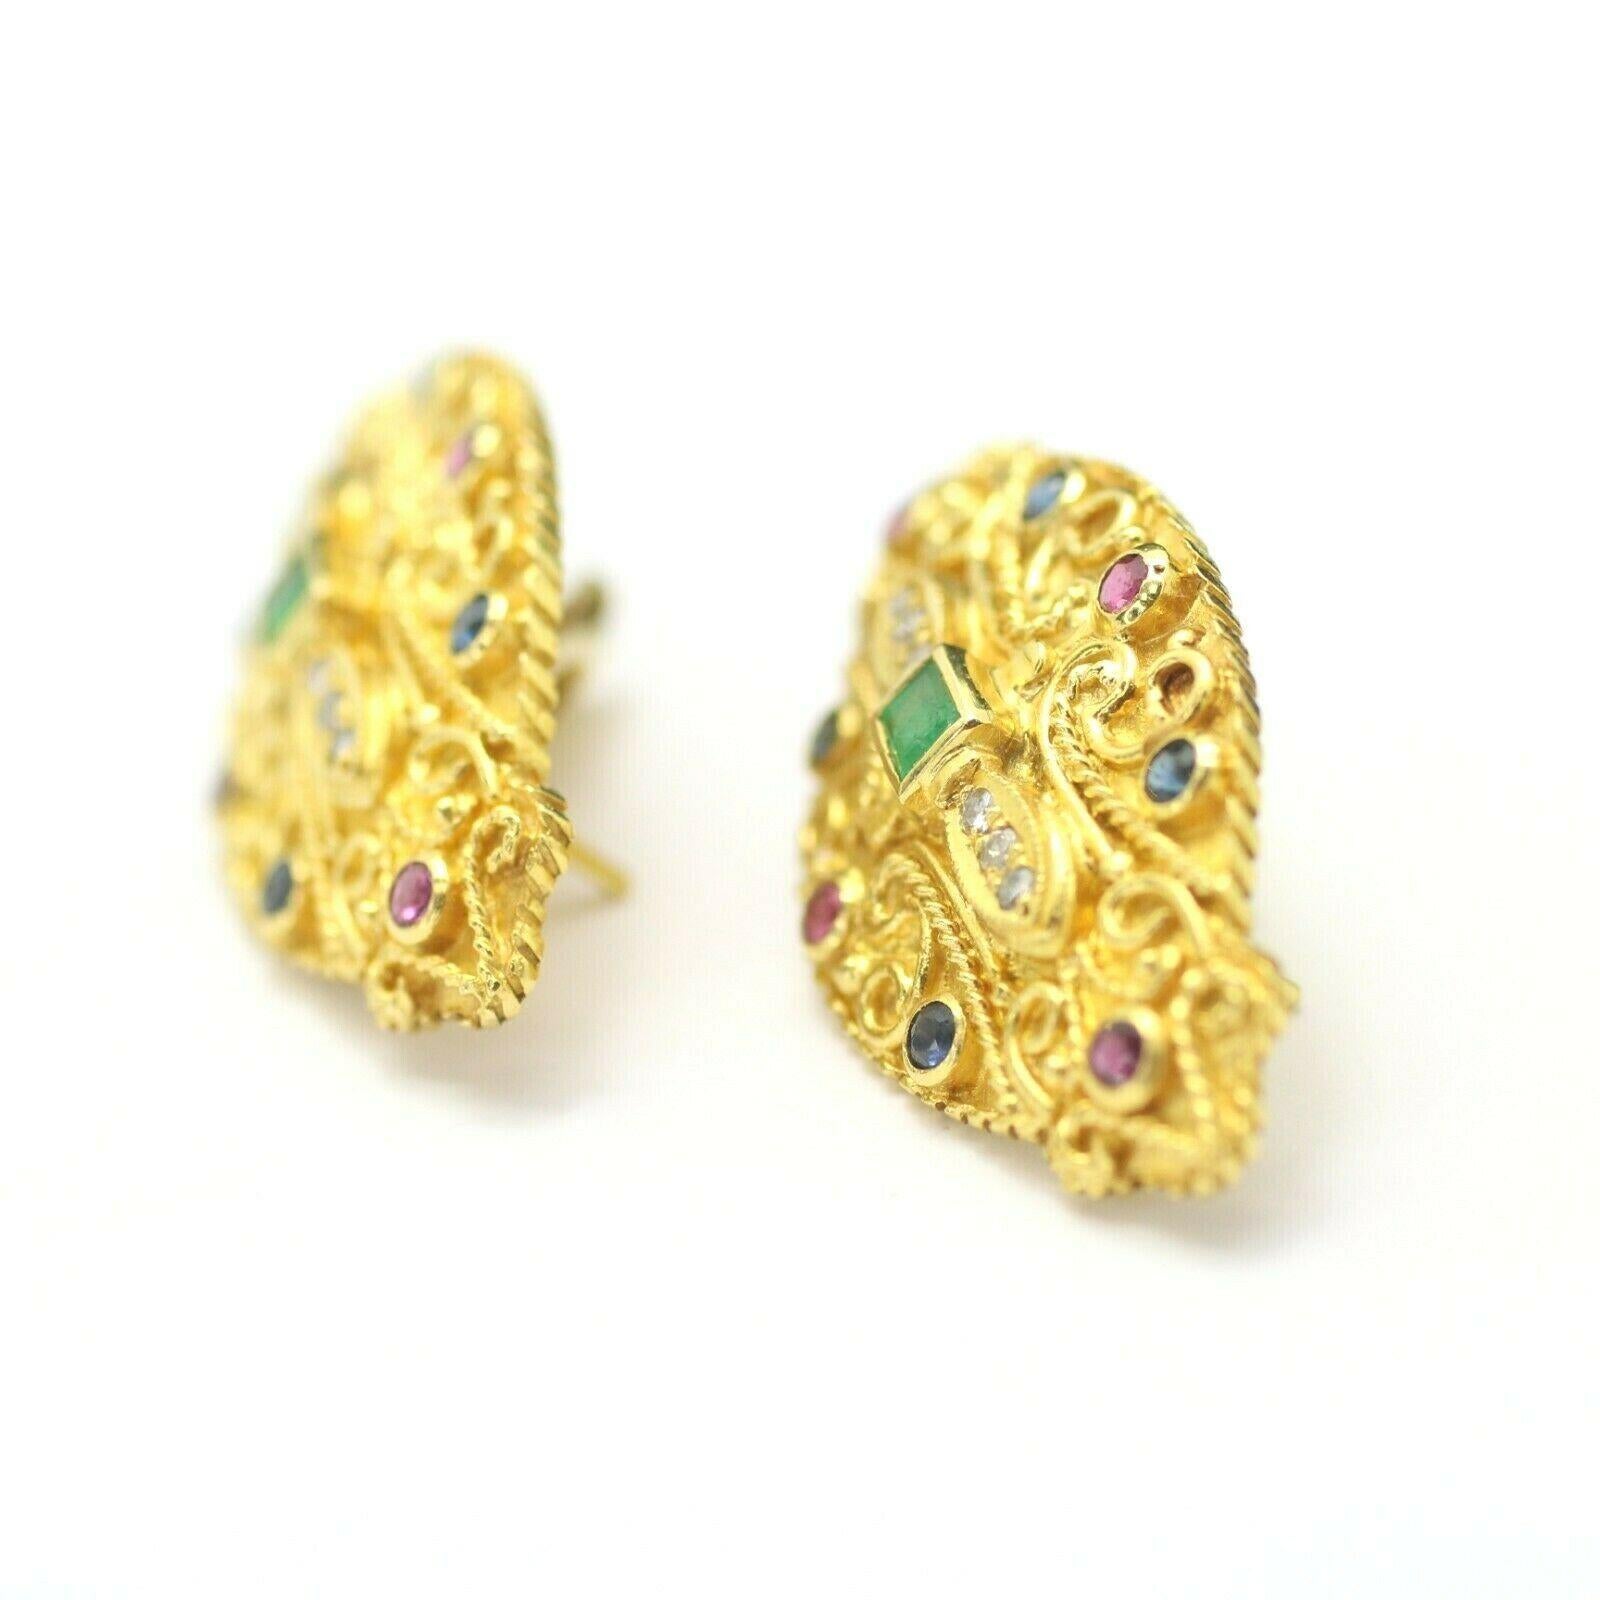 Contemporary Estate Vintage Gemstones and Diamond Clip on Earrings in 18k Yellow Gold